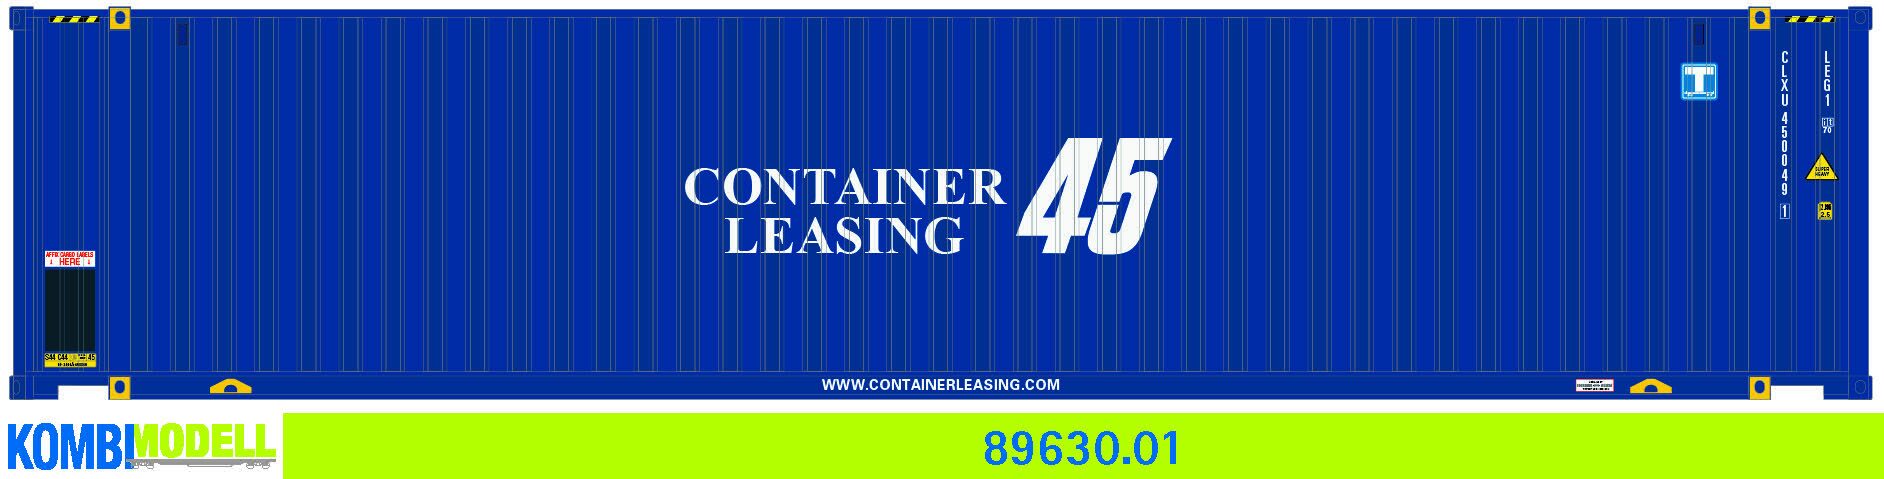 Kombimodell 89630.01 WB-A /Ct 45' (Euro) Container Leasing" blau" #CLXU 450049